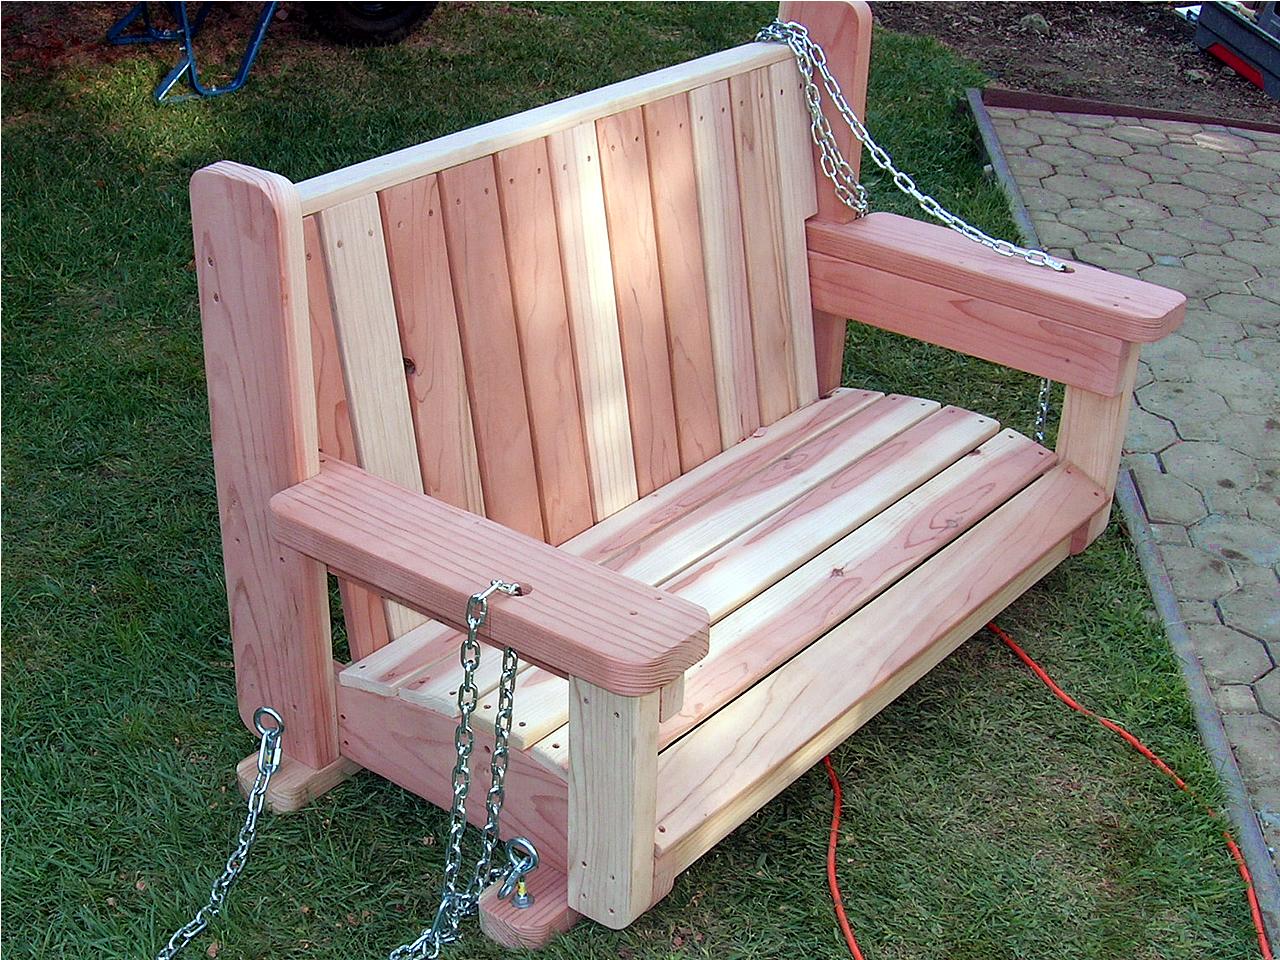 How To Build A Freestanding Arbor Swing, Wooden Porch Swing Kits